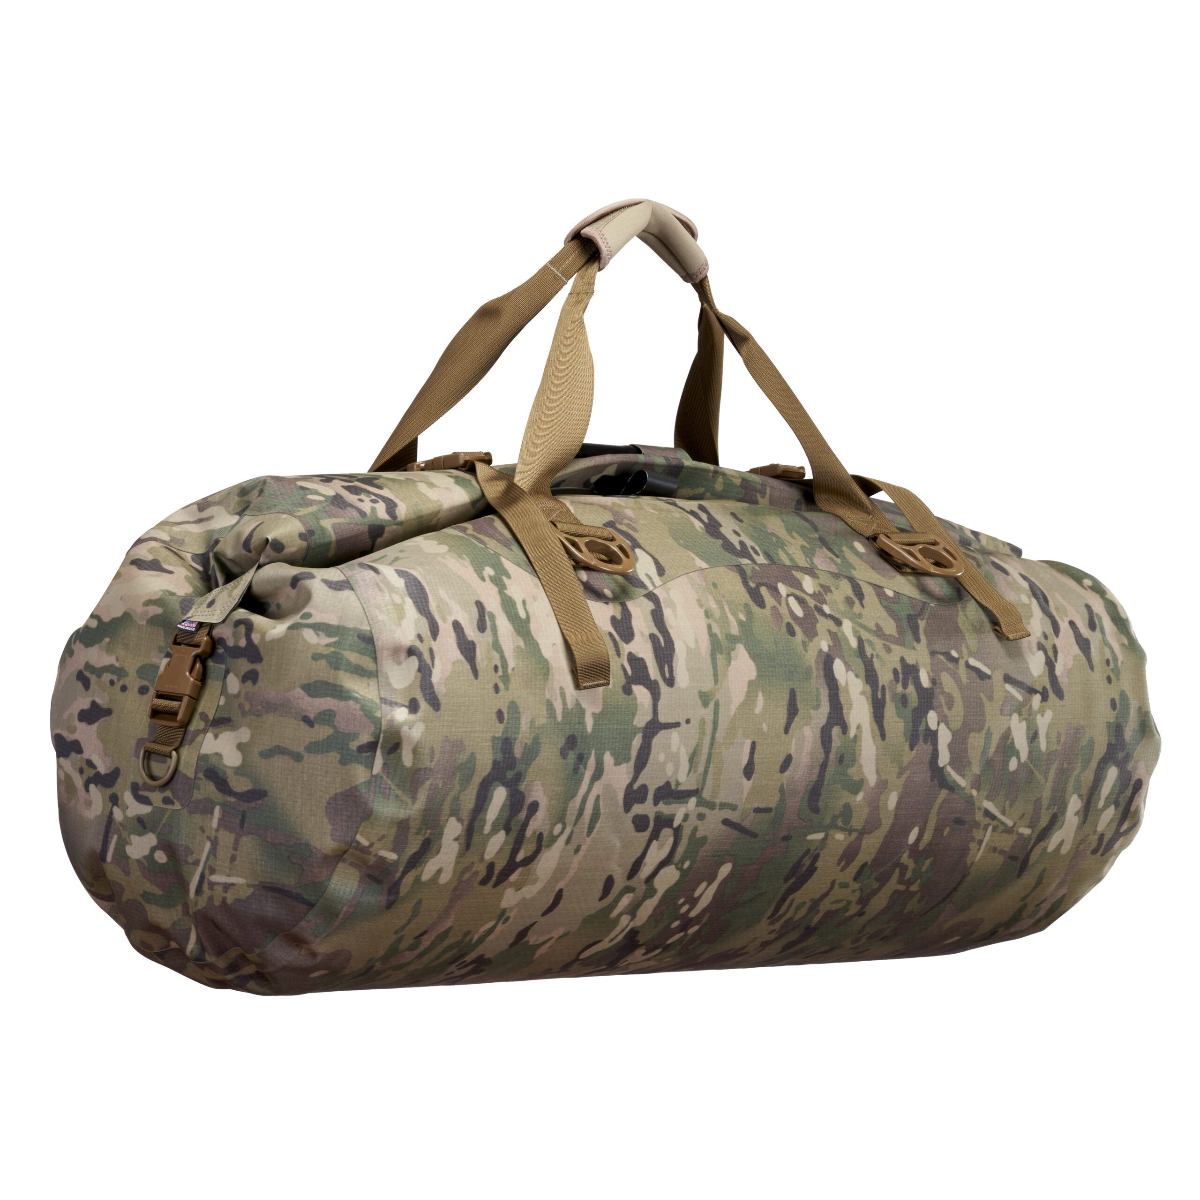 https://www.drybags.com/wp-content/uploads/2021/06/12613-MCM2.png